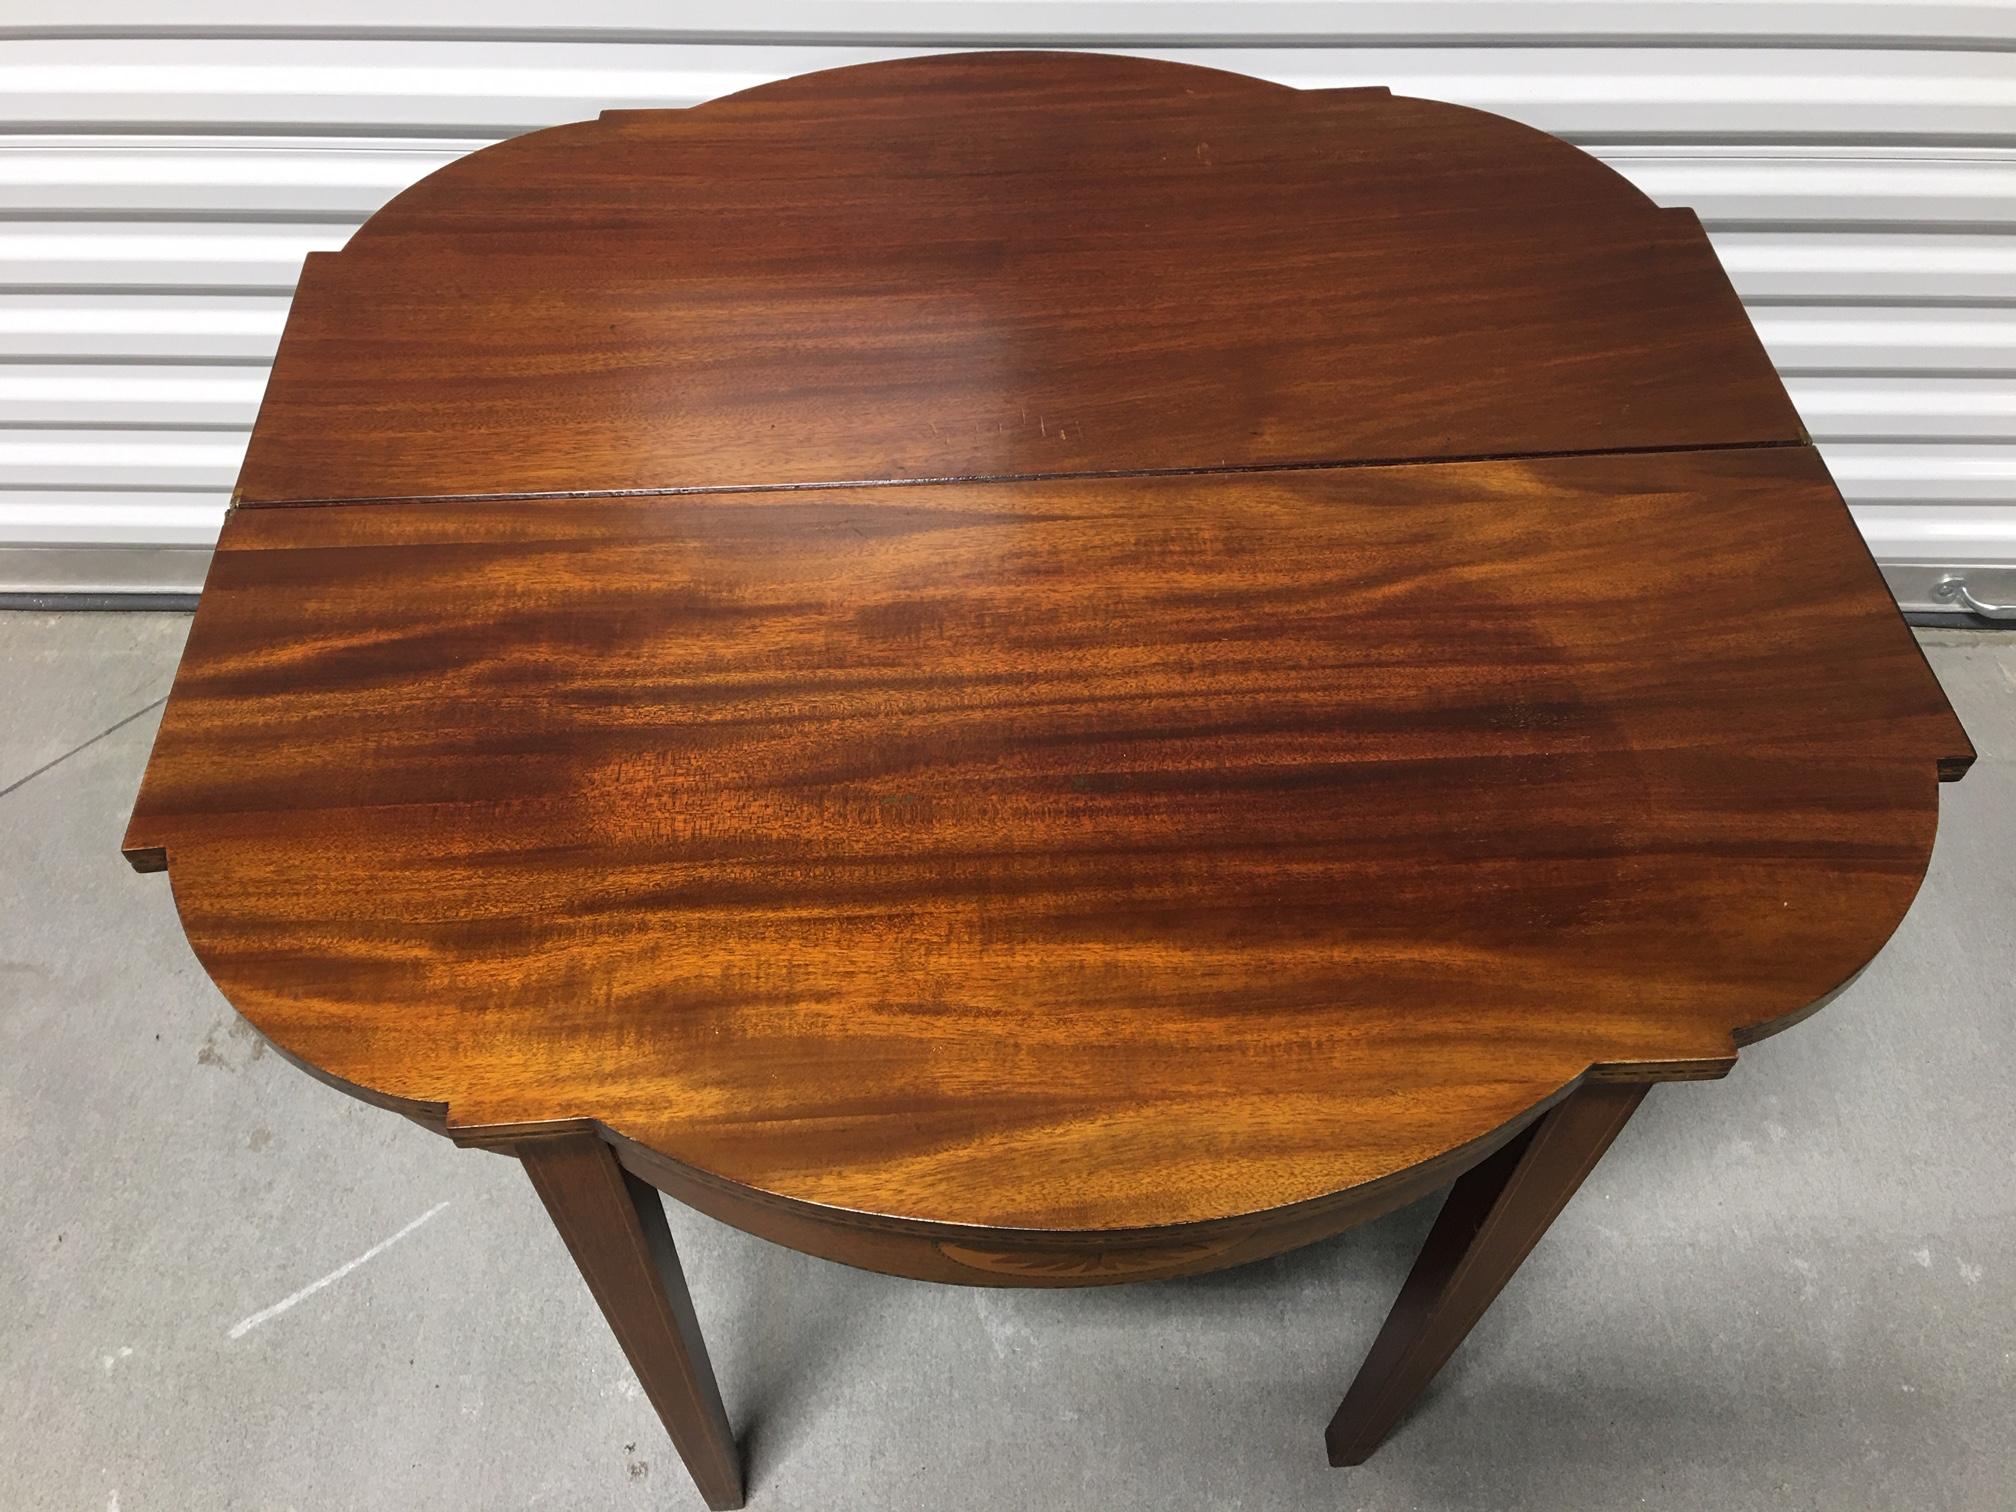 20th Century Rho Mobili d'Epoca Card Table in Mahogany and Satinwood, Italy